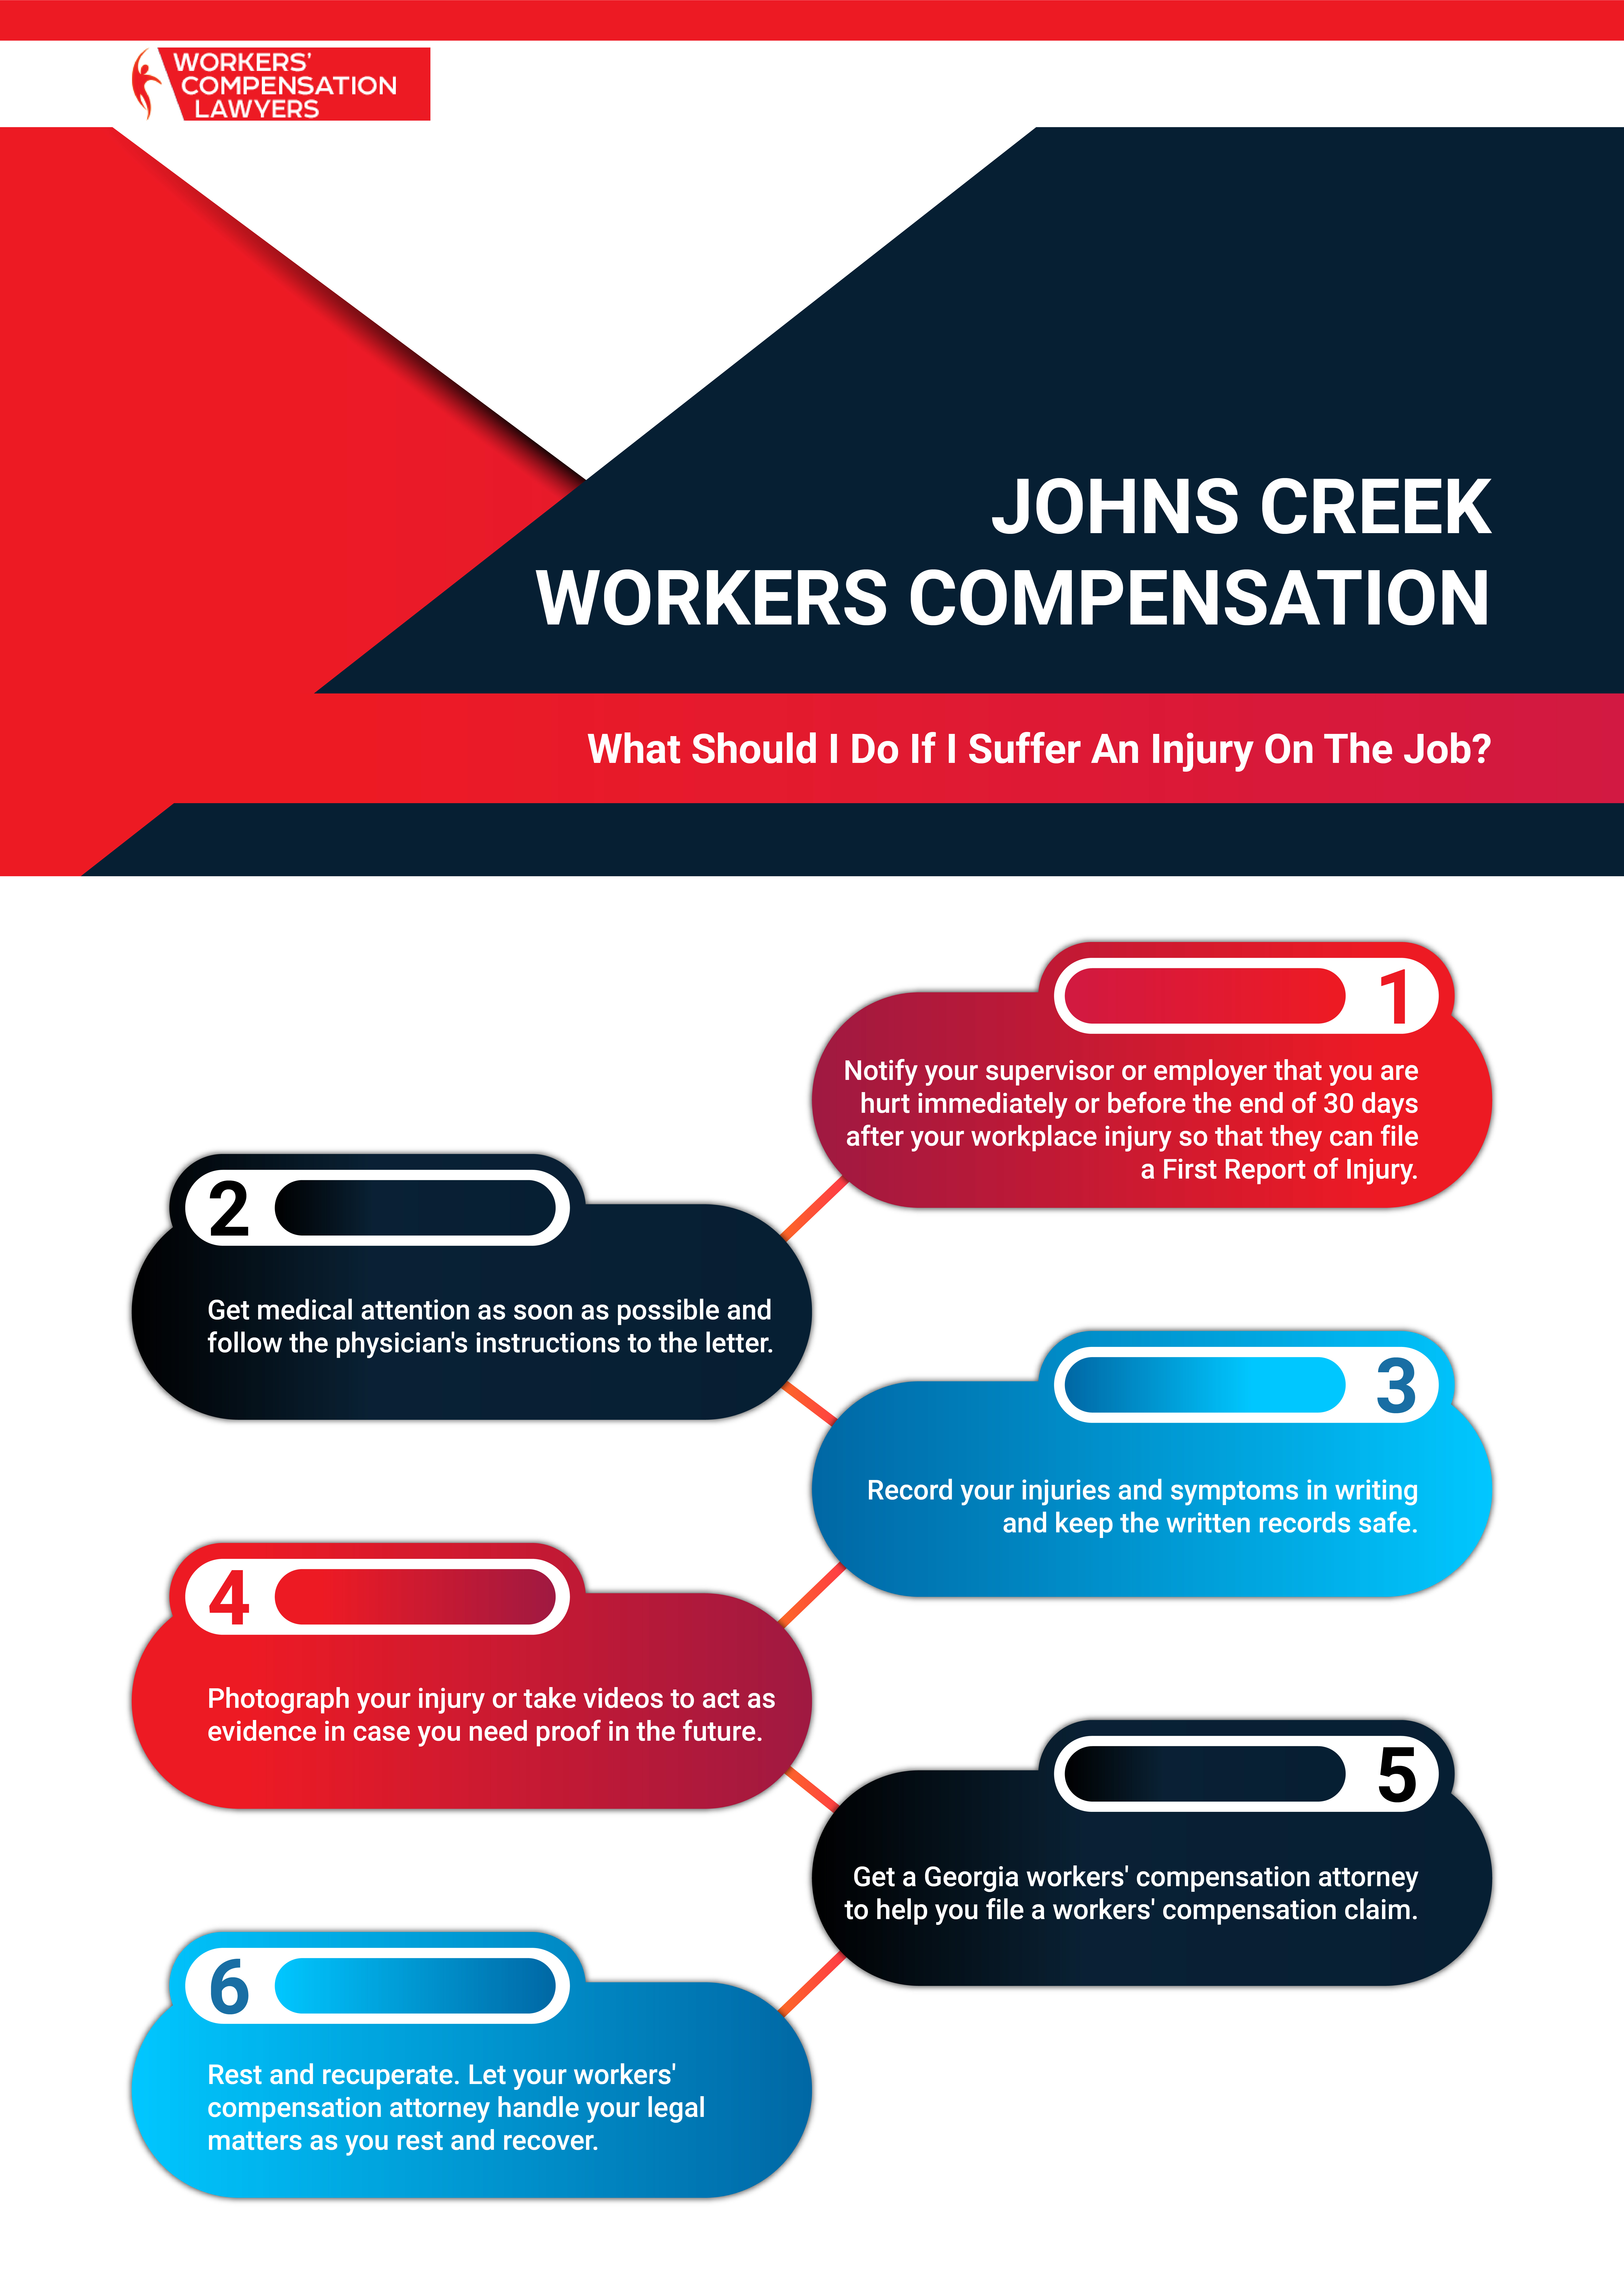 Johns Creek Workers Compensation Infographic